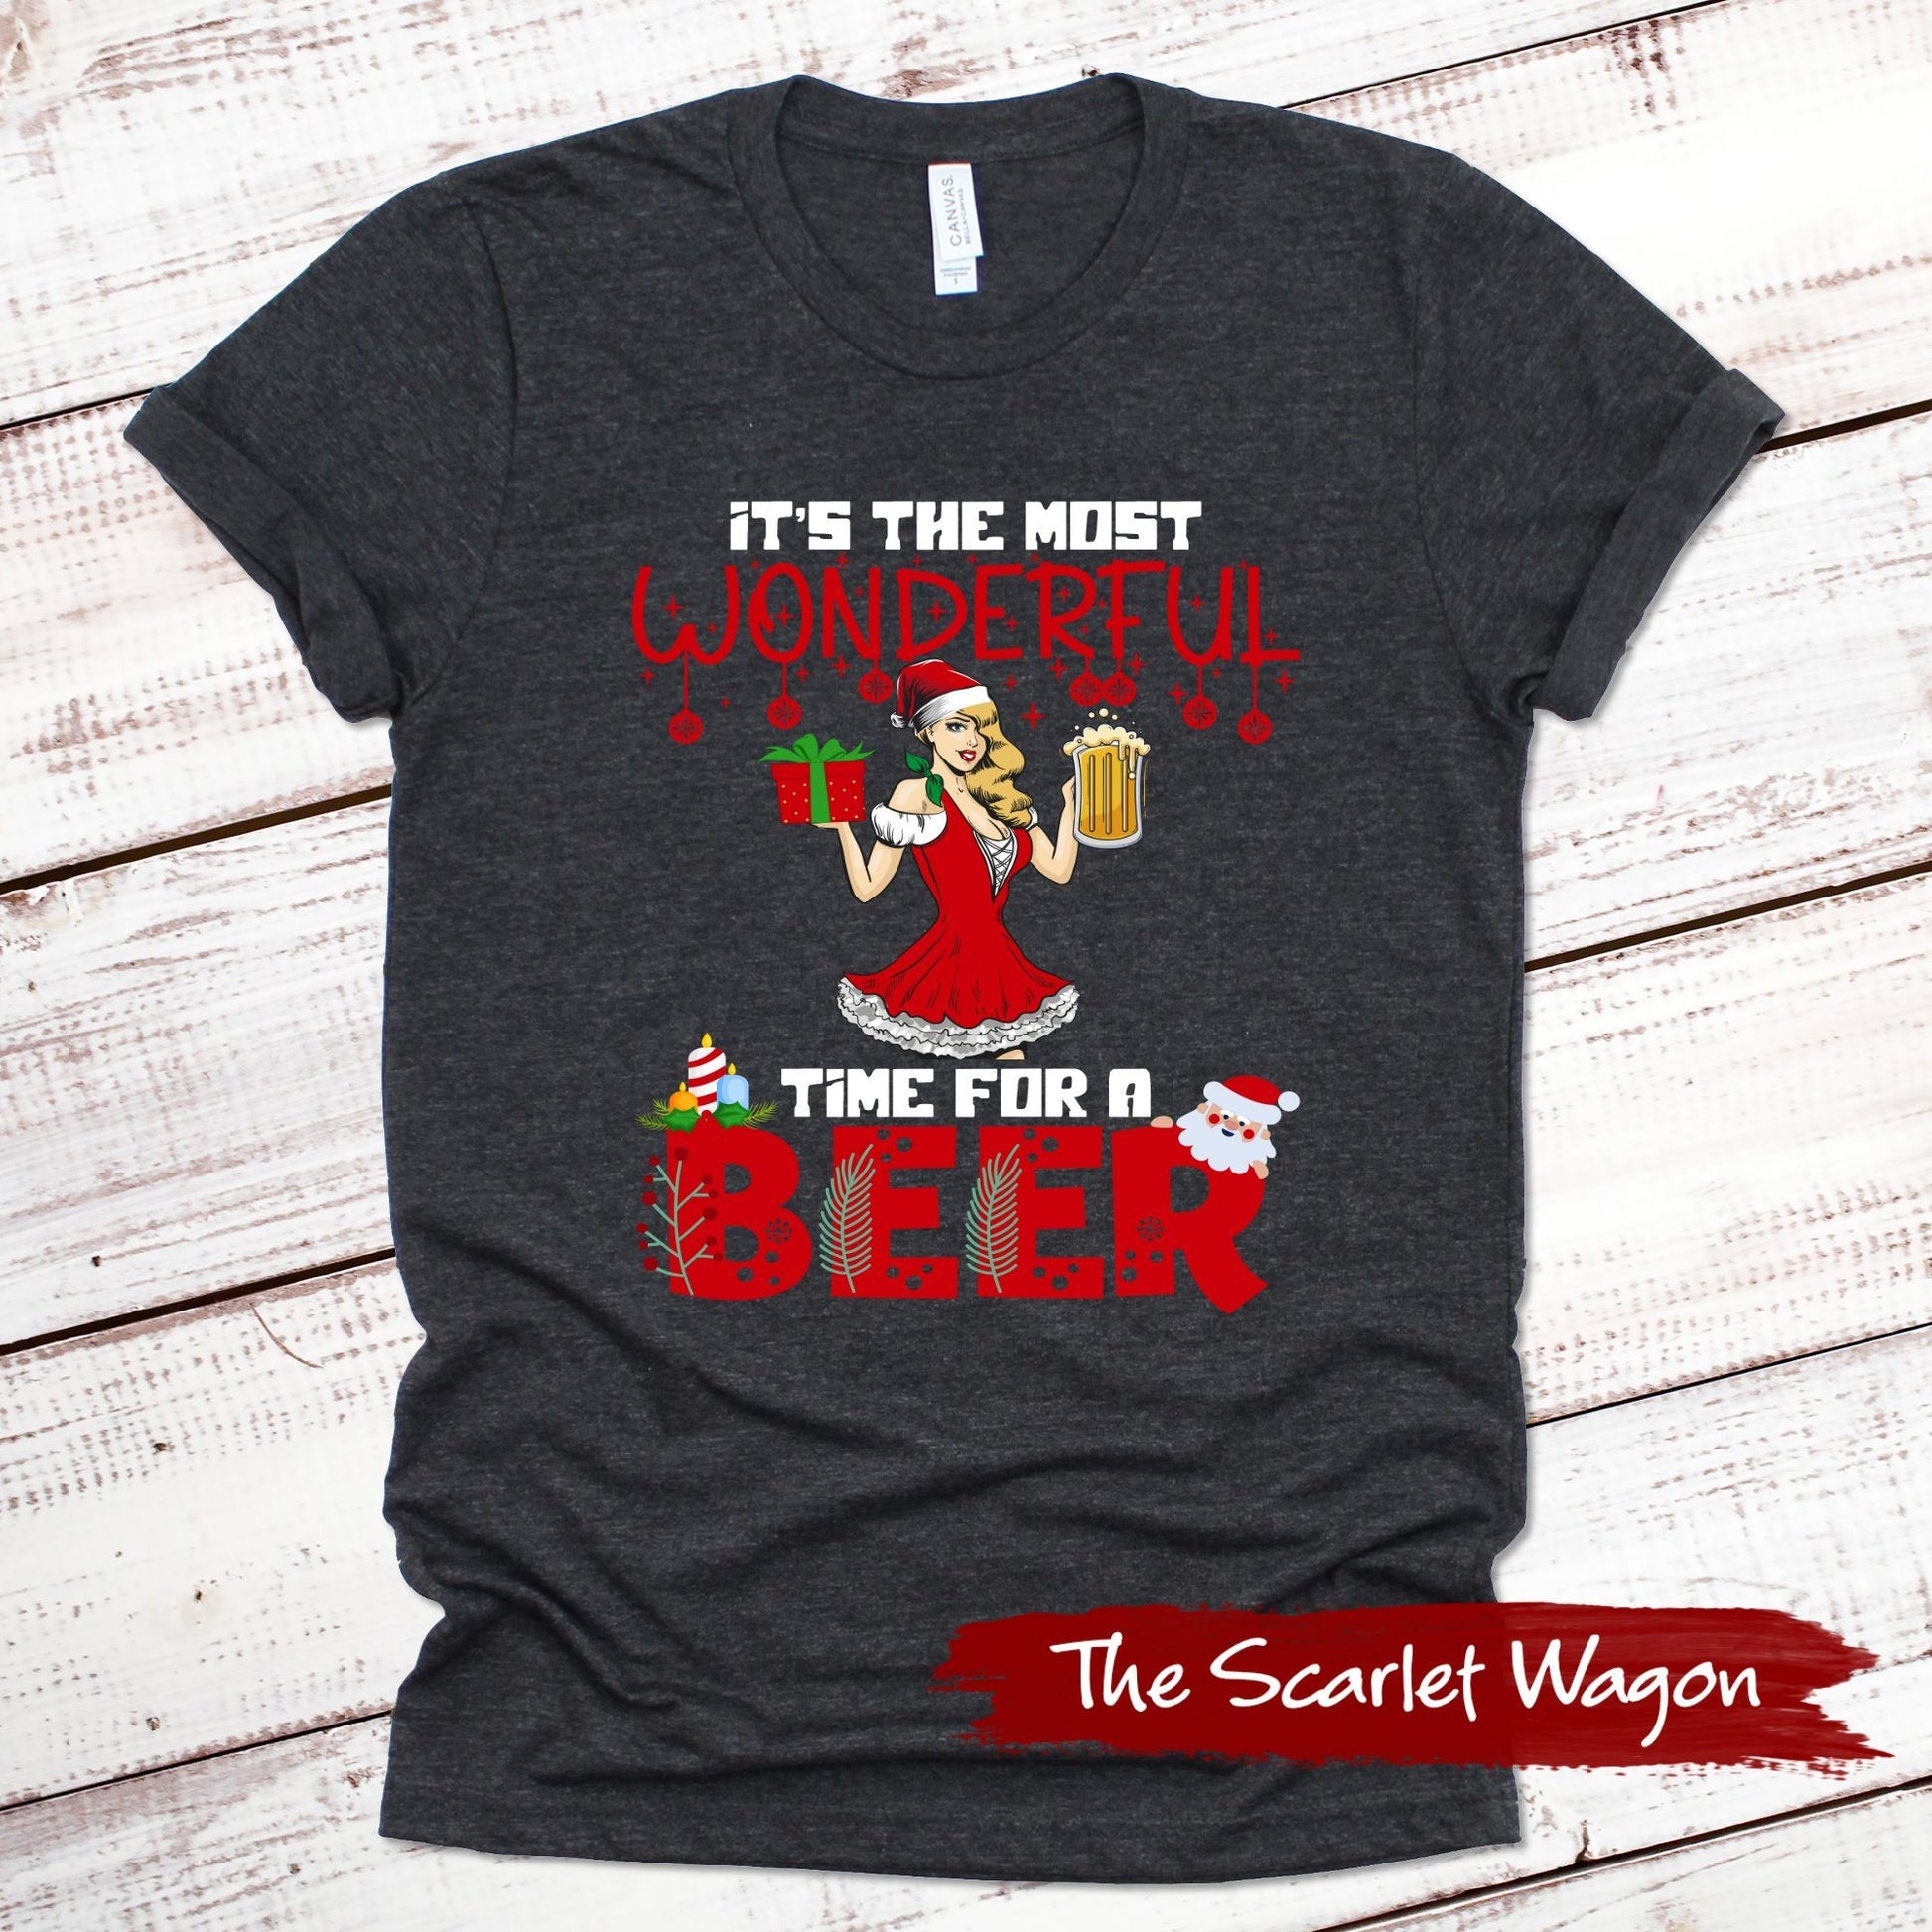 Most Wonderful Time for a Beer Christmas Shirt Scarlet Wagon Dark Gray Heather XS 